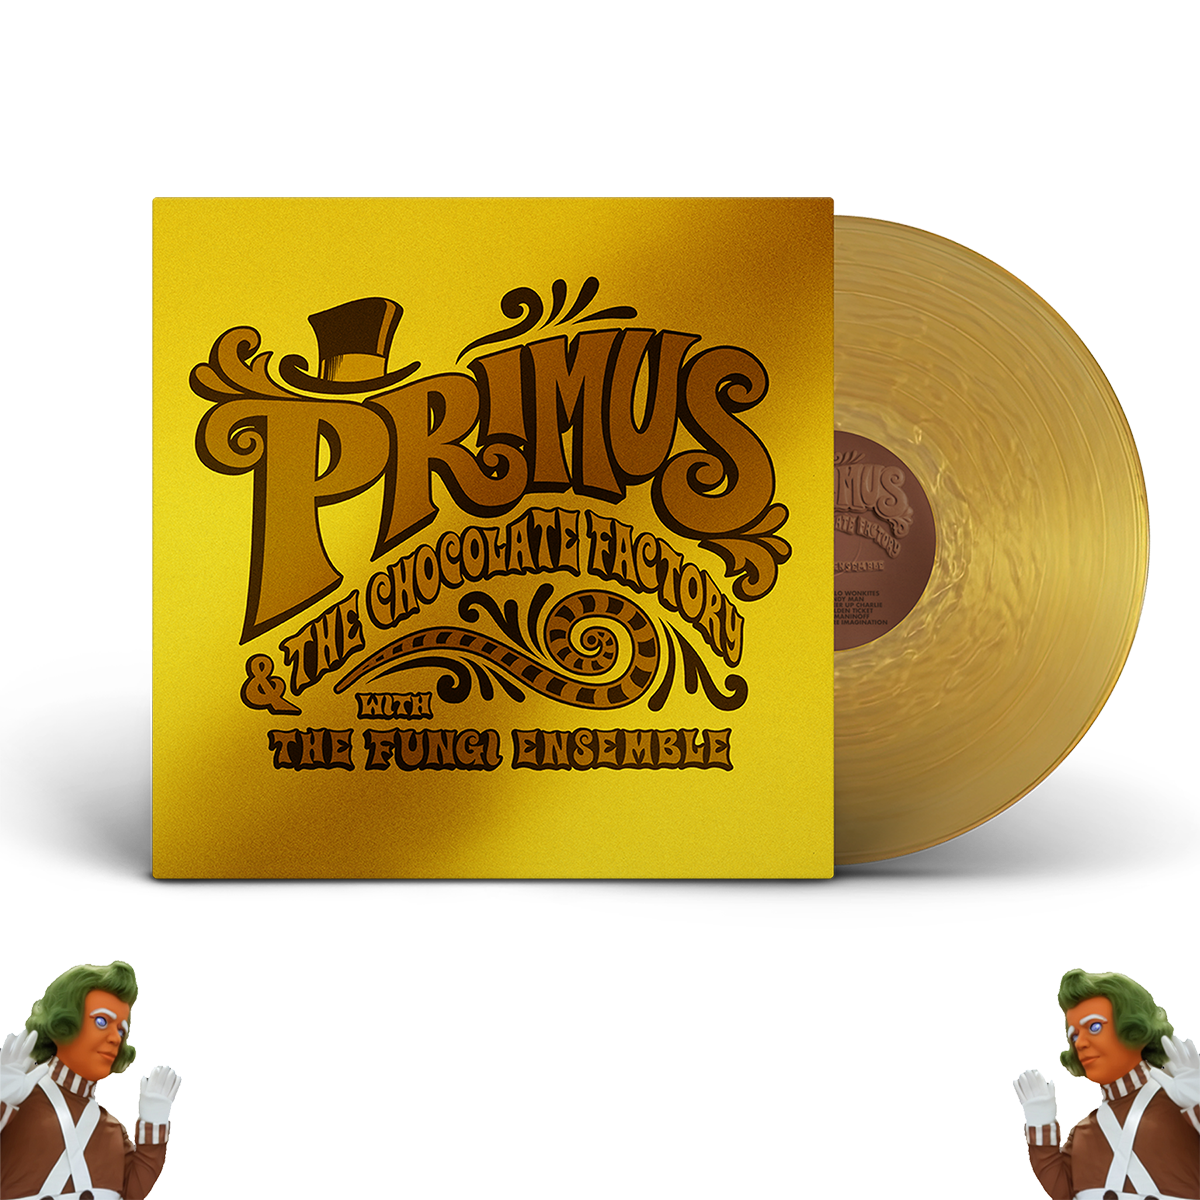 Primus - Primus & The Chocolate Factory with The Fungi Ensemble (Golden Wrapper Edition)